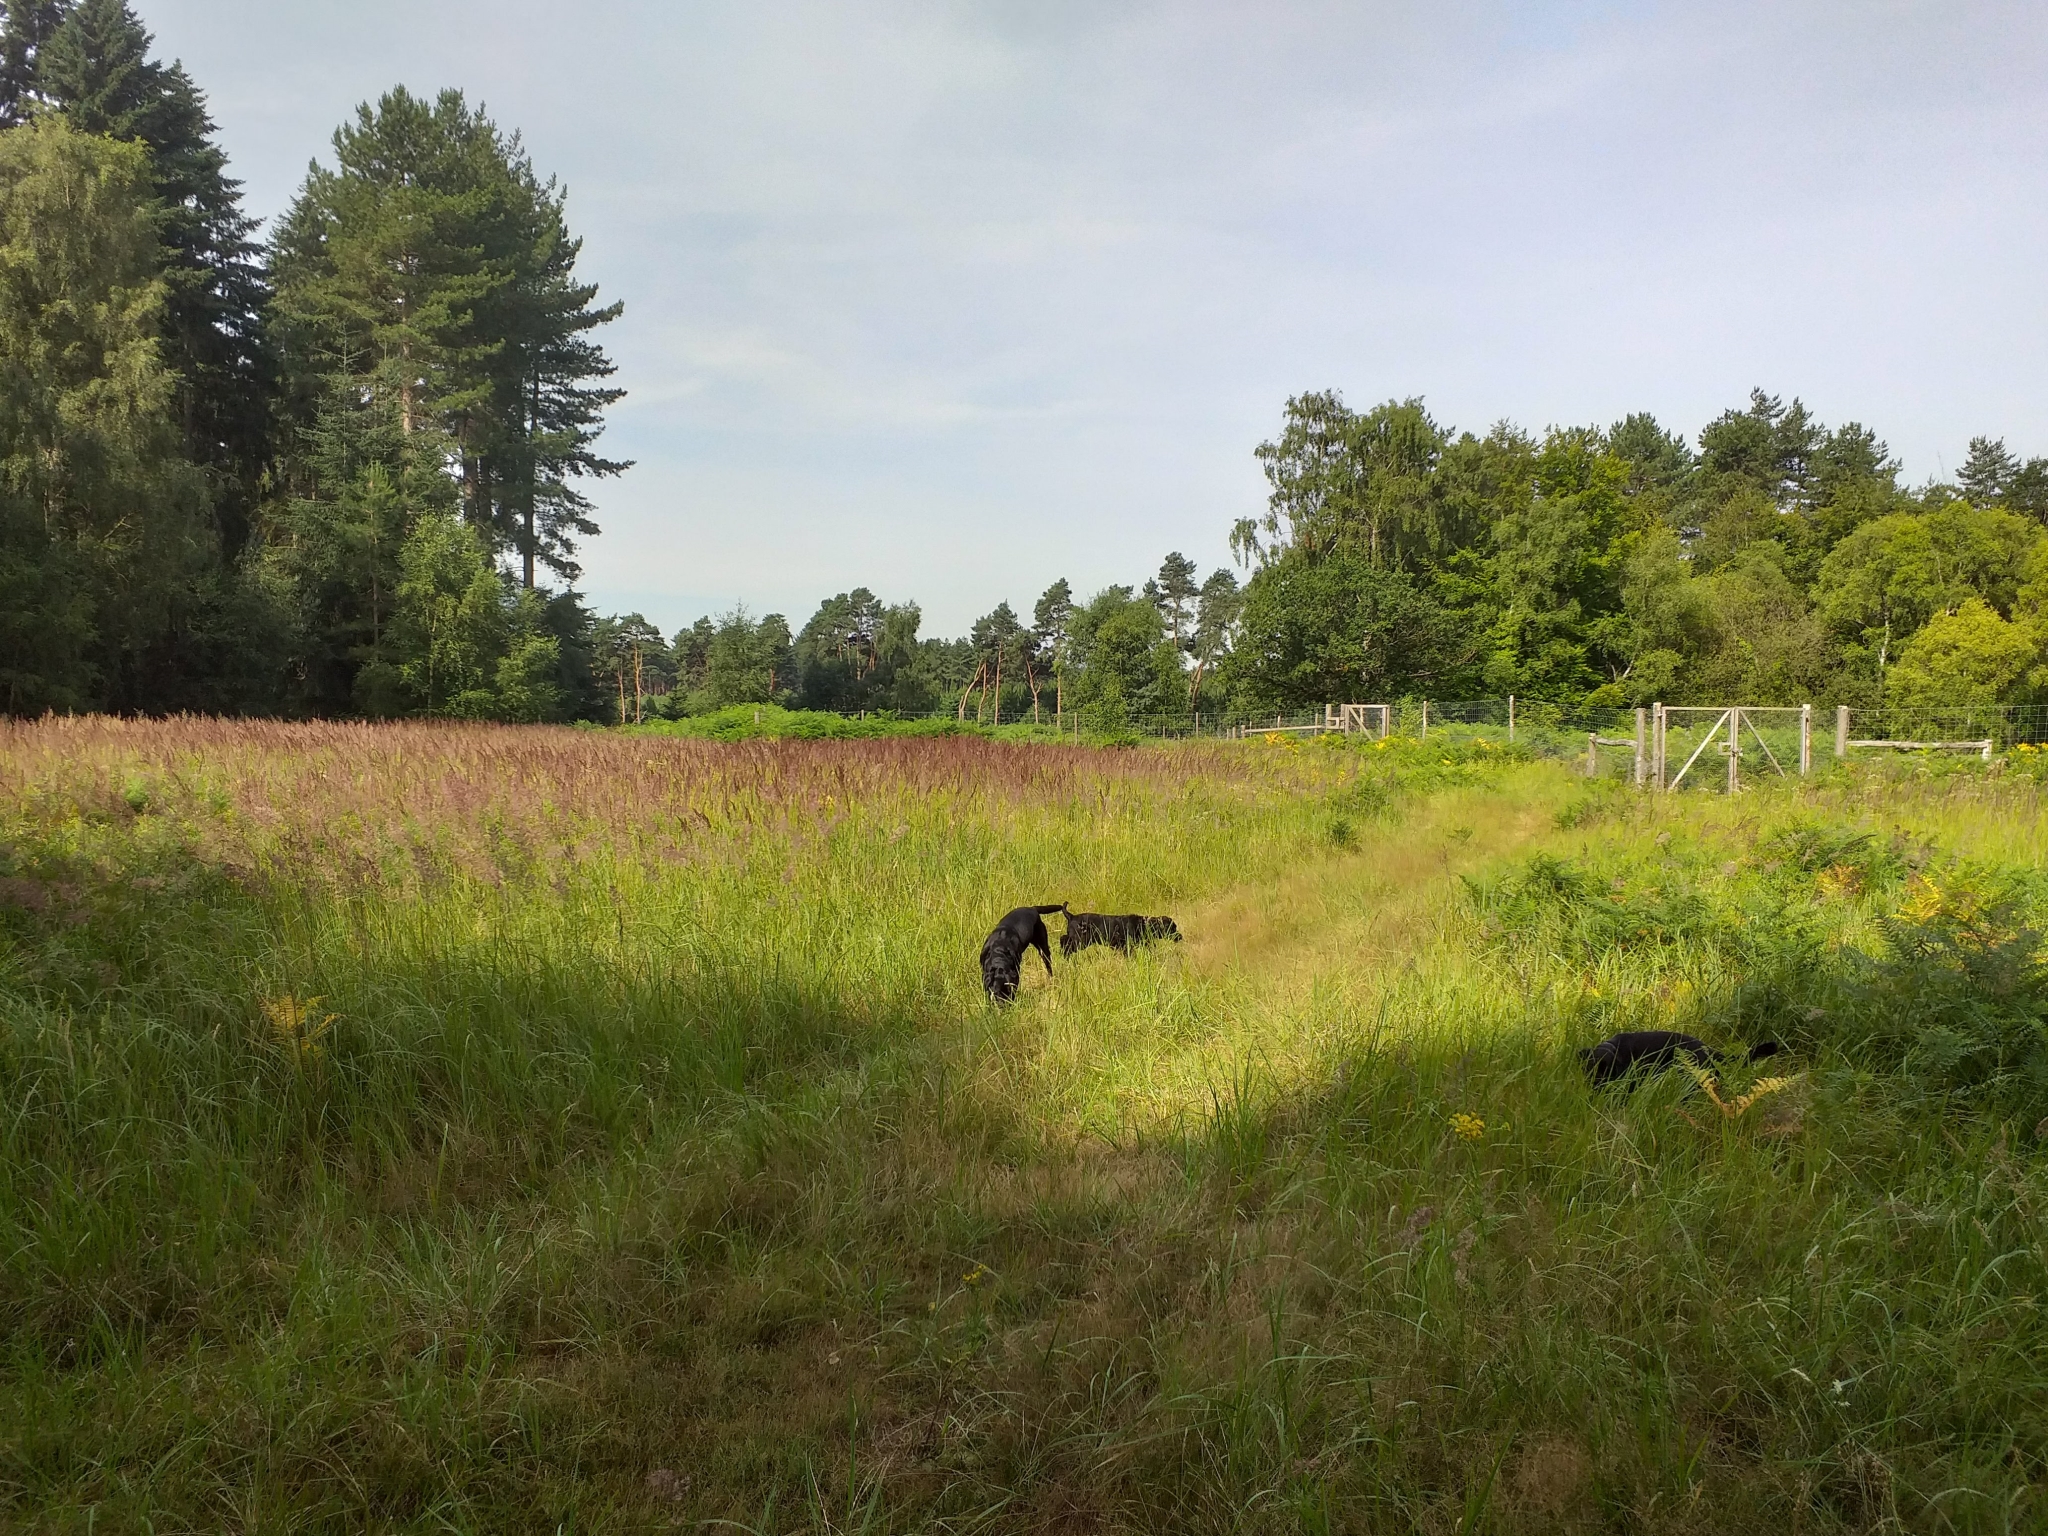 A photo from the FoTF Conservation Event - July 2019 - Weeding at Rex Graham Reserve : Dogs play in the grass at Rex Graham Reserve